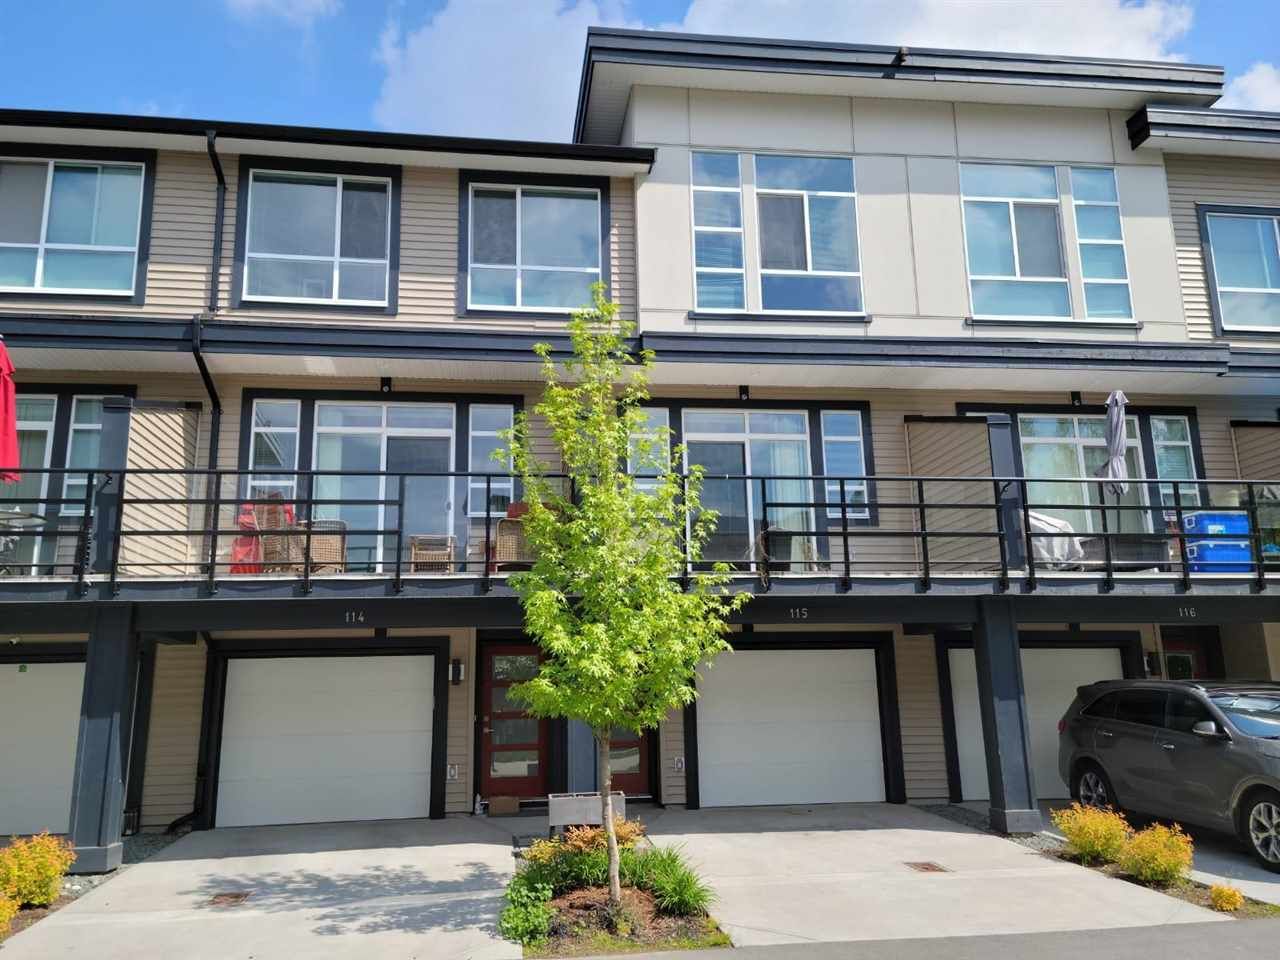 Main Photo: 115 8413 MIDTOWN Way in Chilliwack: Chilliwack W Young-Well Townhouse for sale : MLS®# R2576957